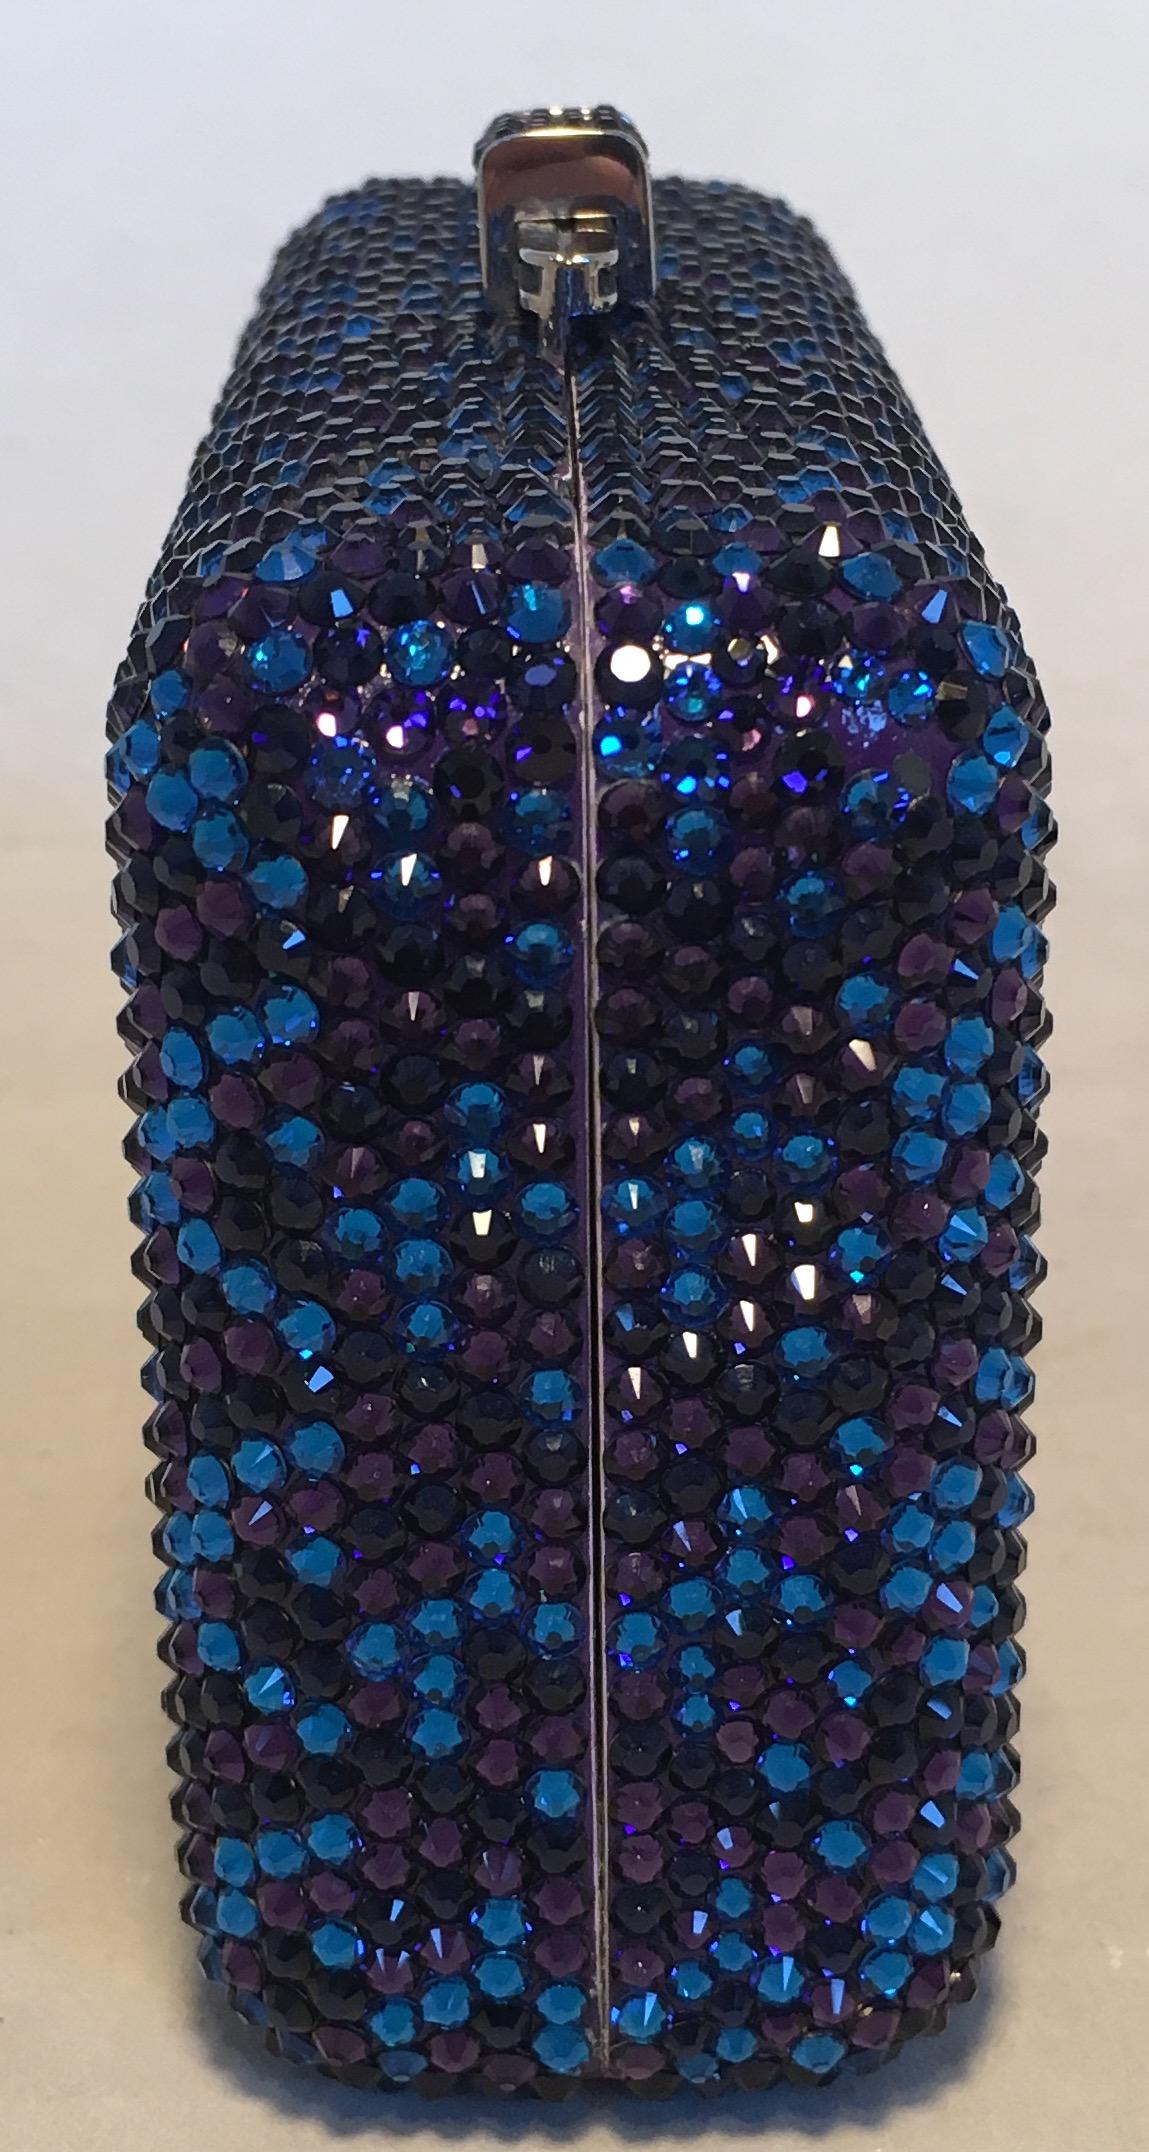 Beautiful Judith Leiber Blue and Purple Swarovski Crystal Minaudiere Evening Bag Clutch in excellent condition. Blue and purple crystal exterior trimmed with silver hardware and a top sliding latch closure. Silver leather interior with removable